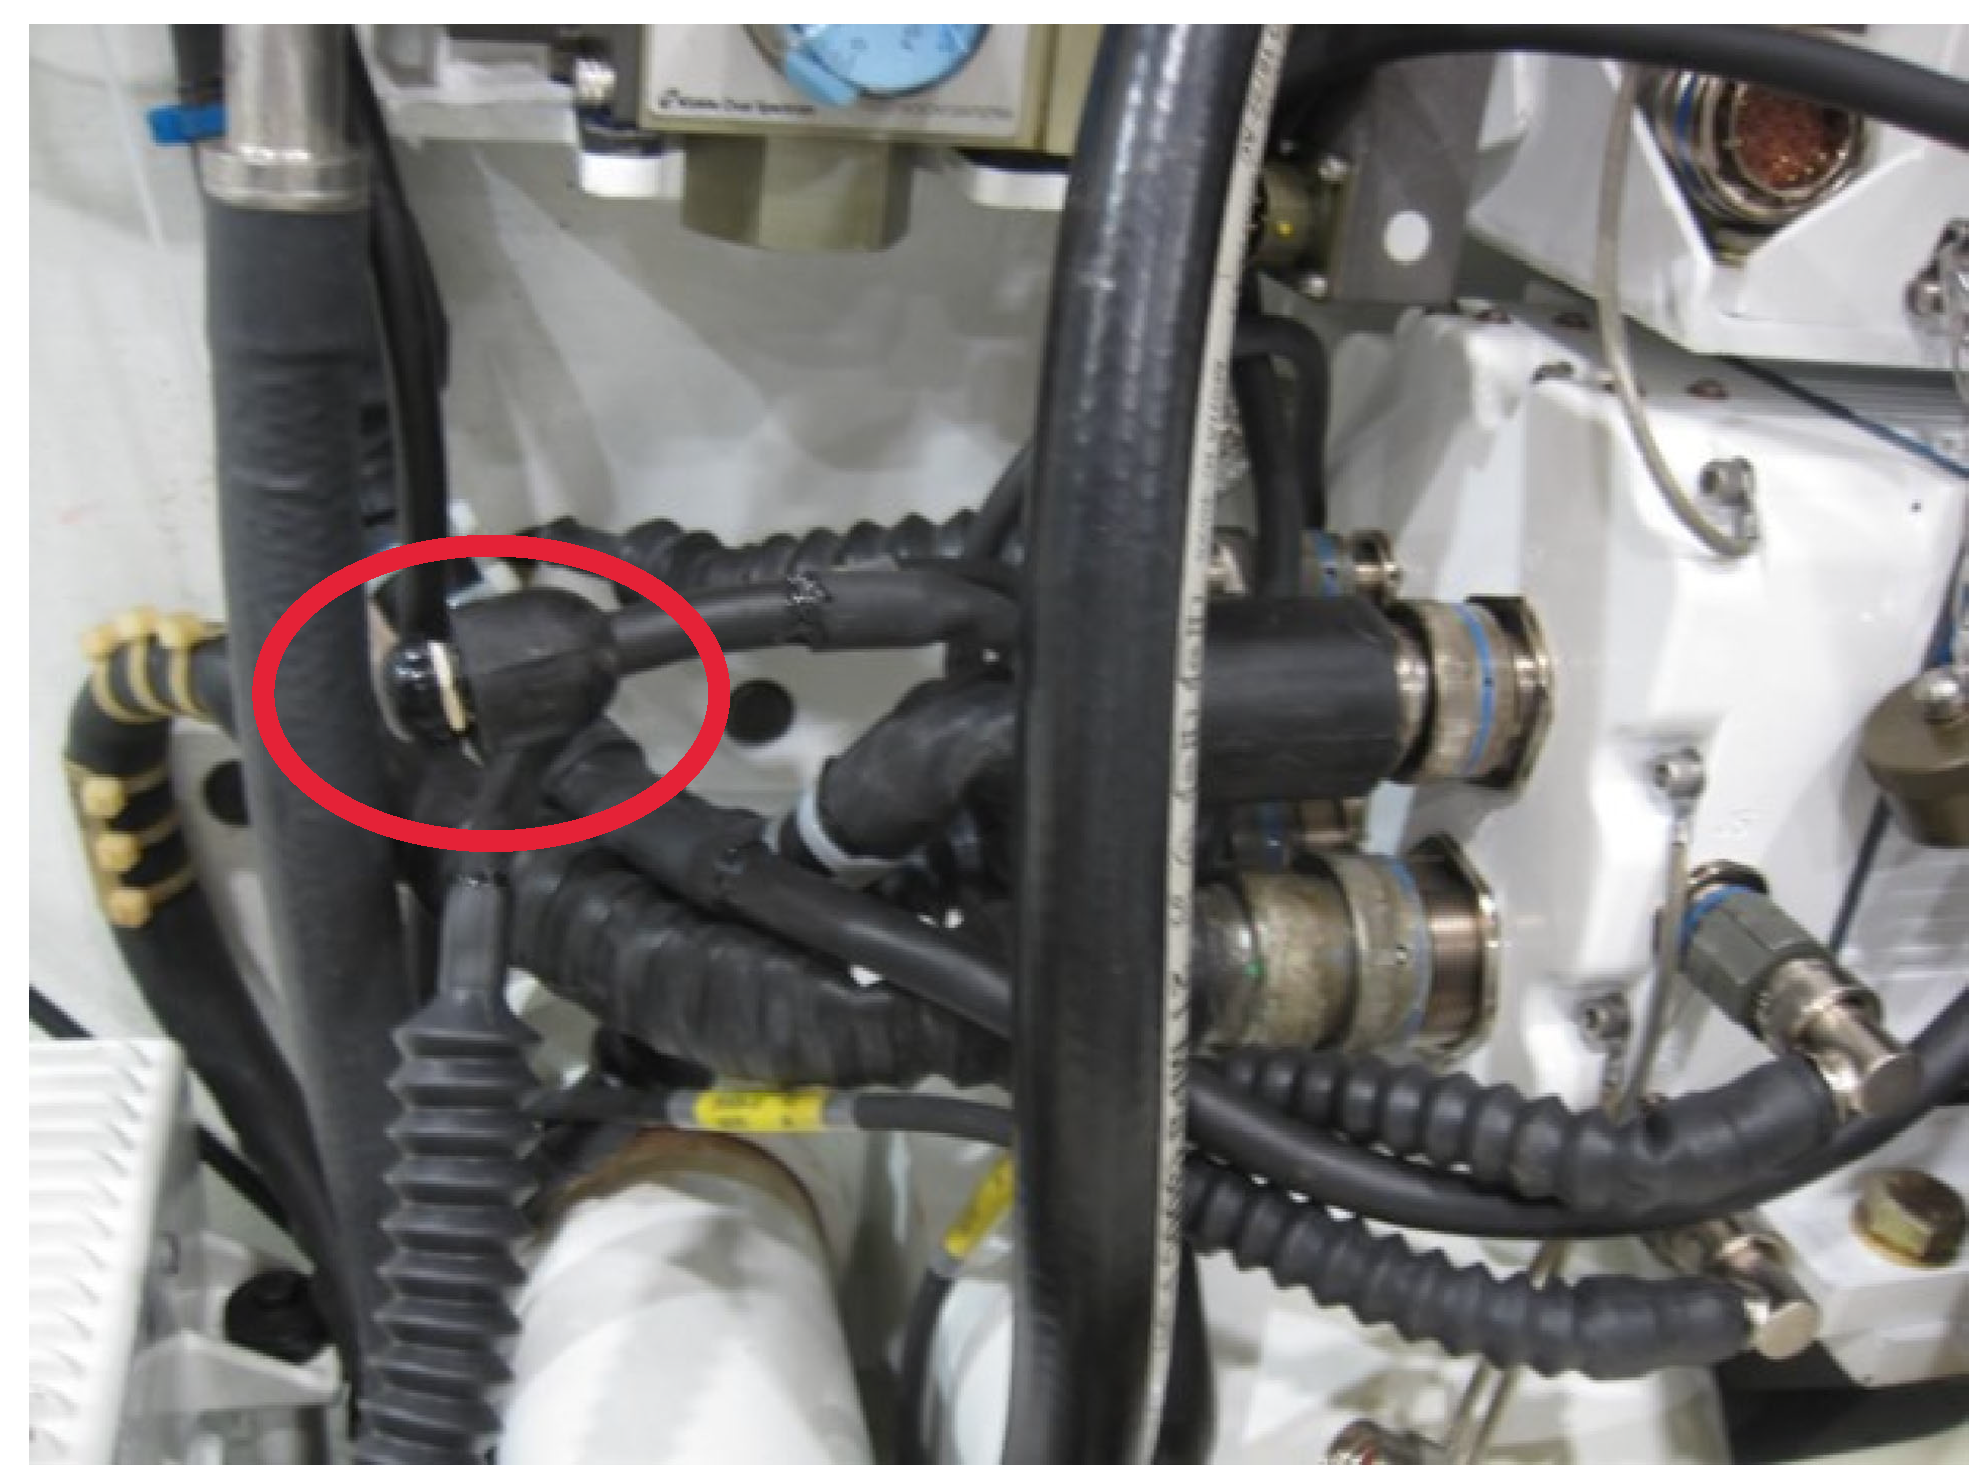 Reset button located on 2W526-E harness